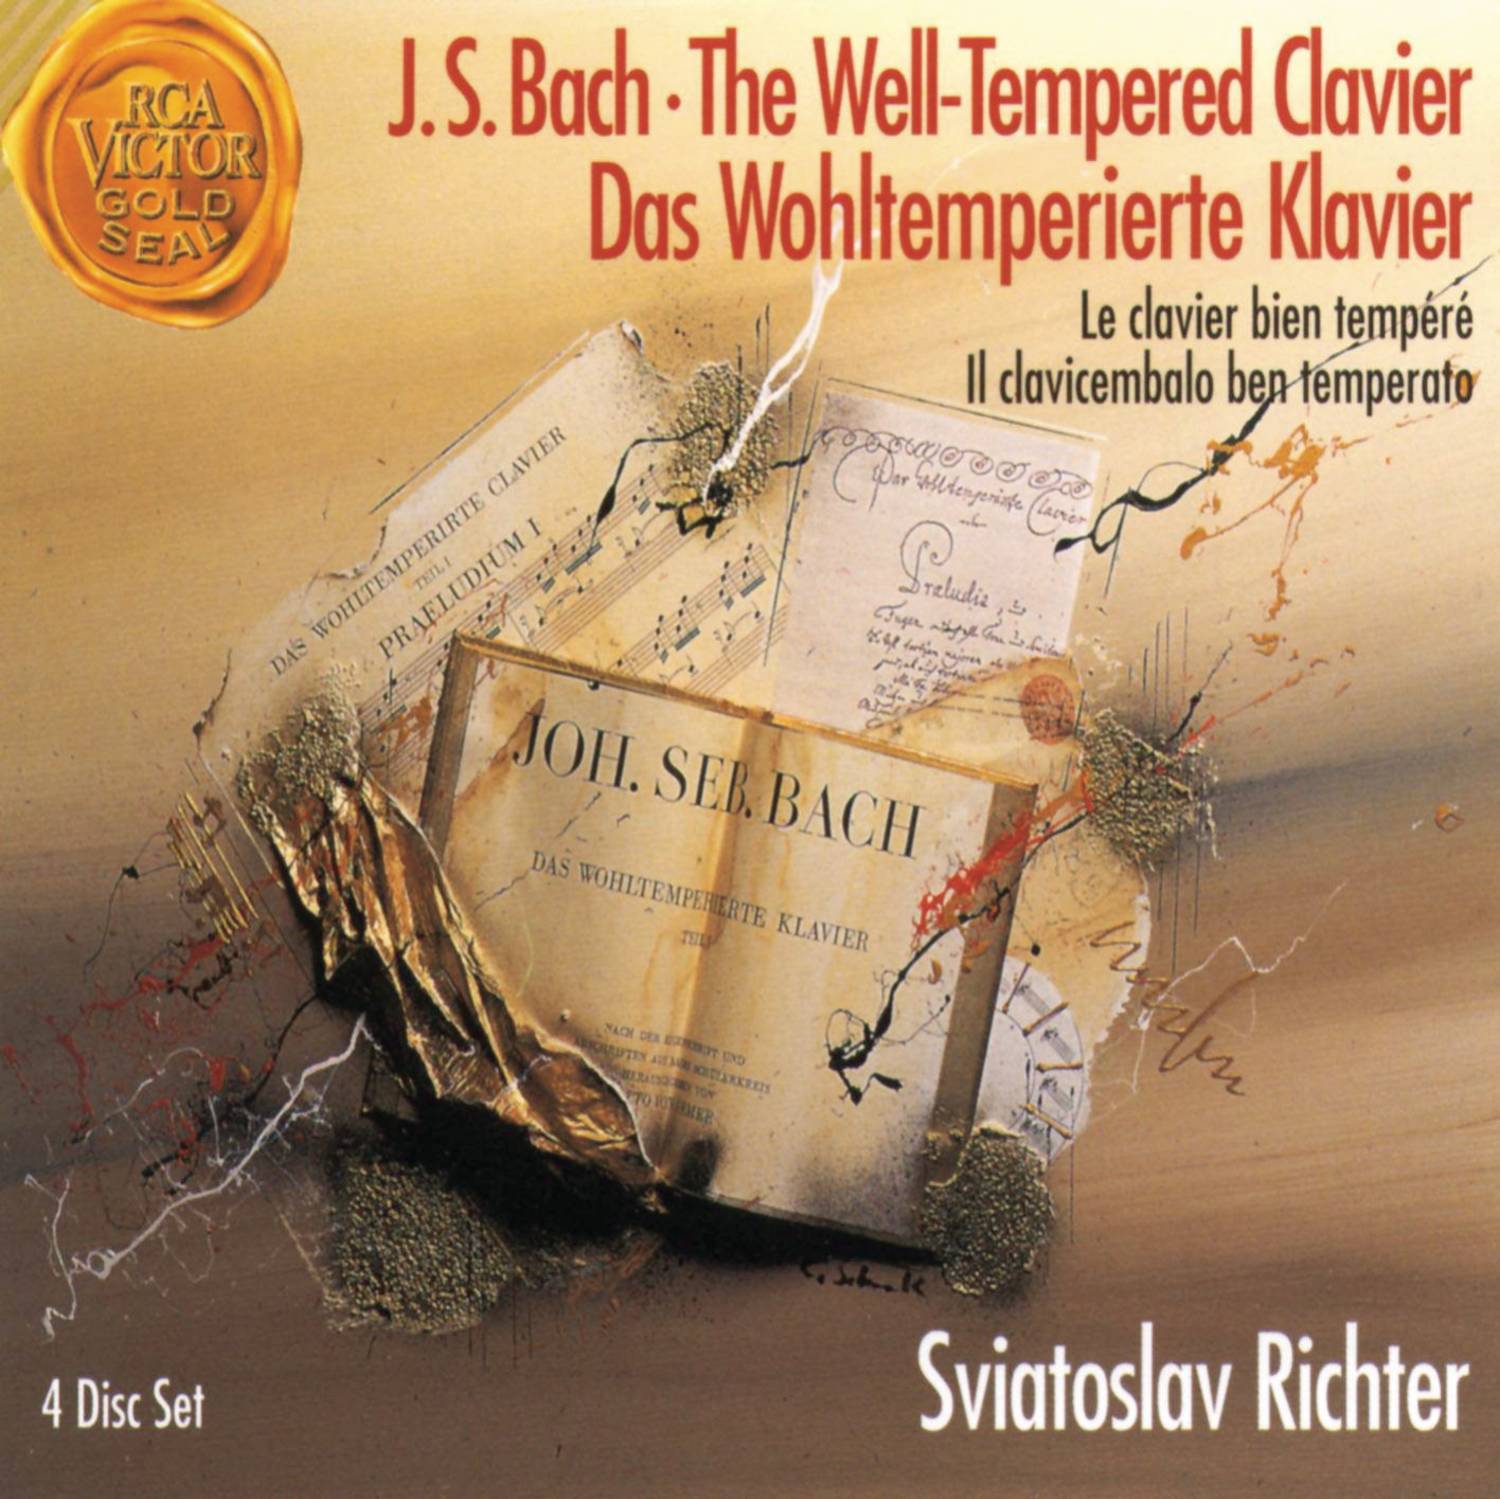 The Well-Tempered Clavier, Book 2:Prelude and Fugue No. 9 in E major, BWV 878